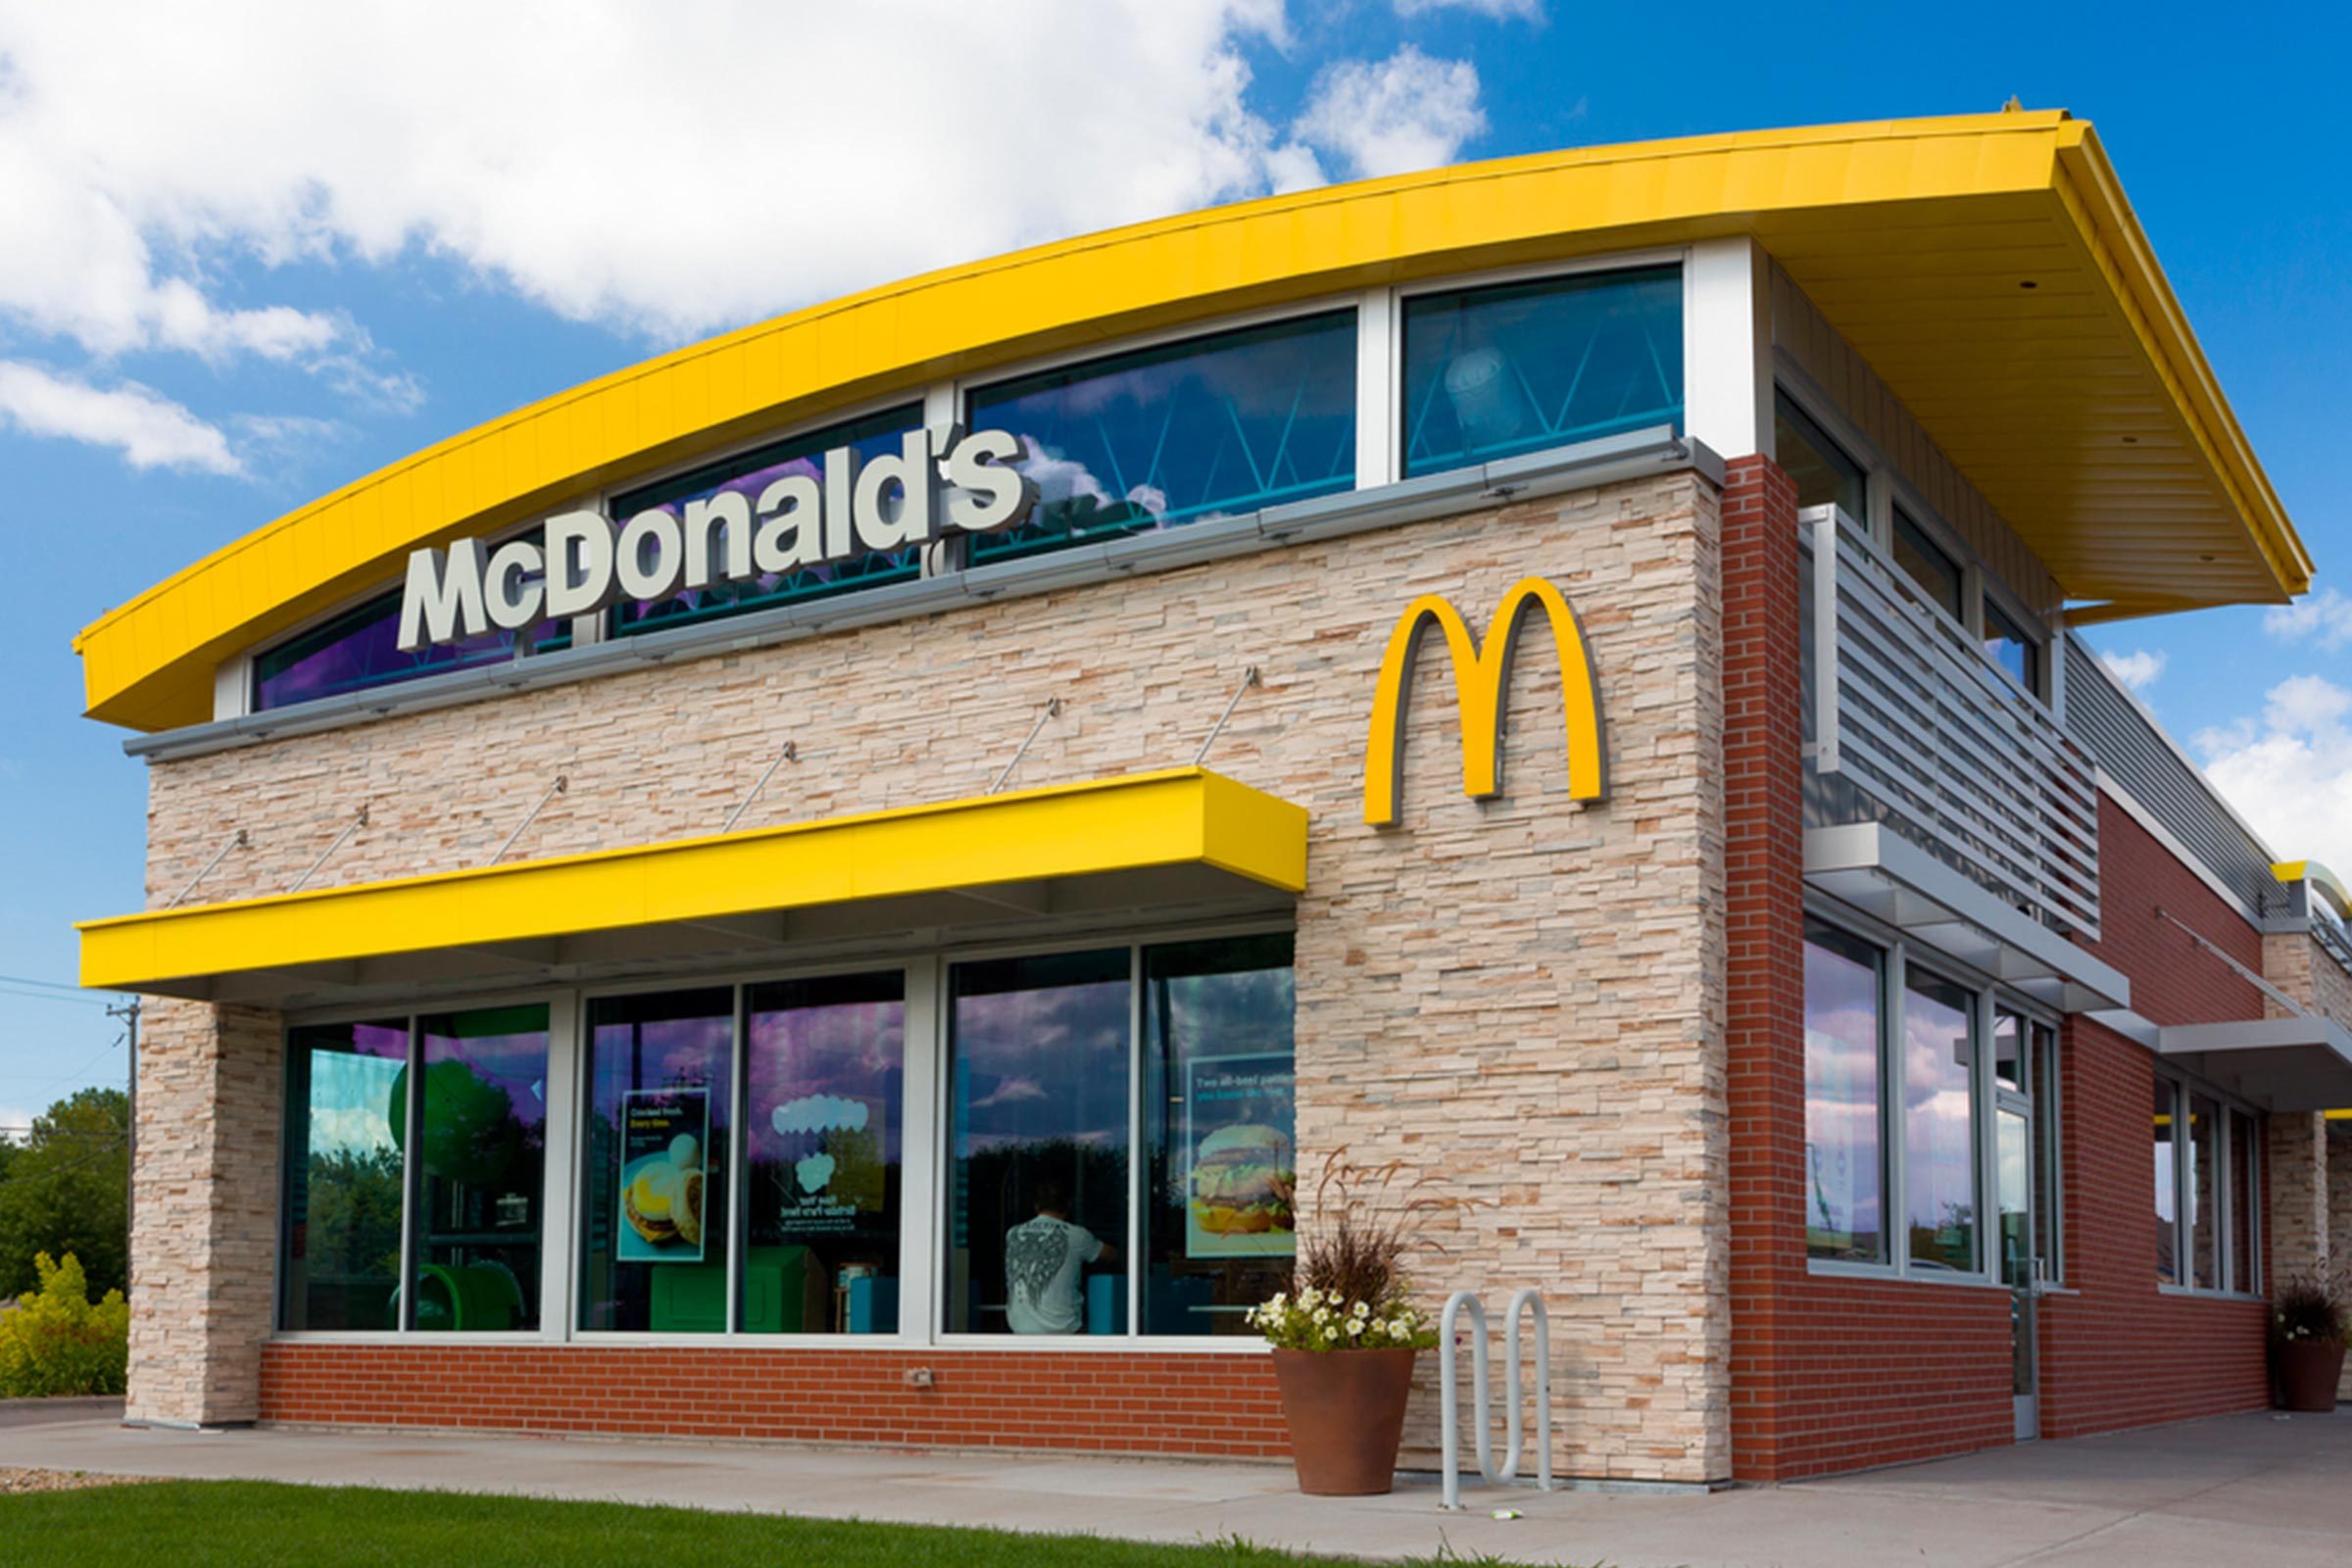 The Real Way McDonald’s Makes Money (It’s Not Food) Reader’s Digest